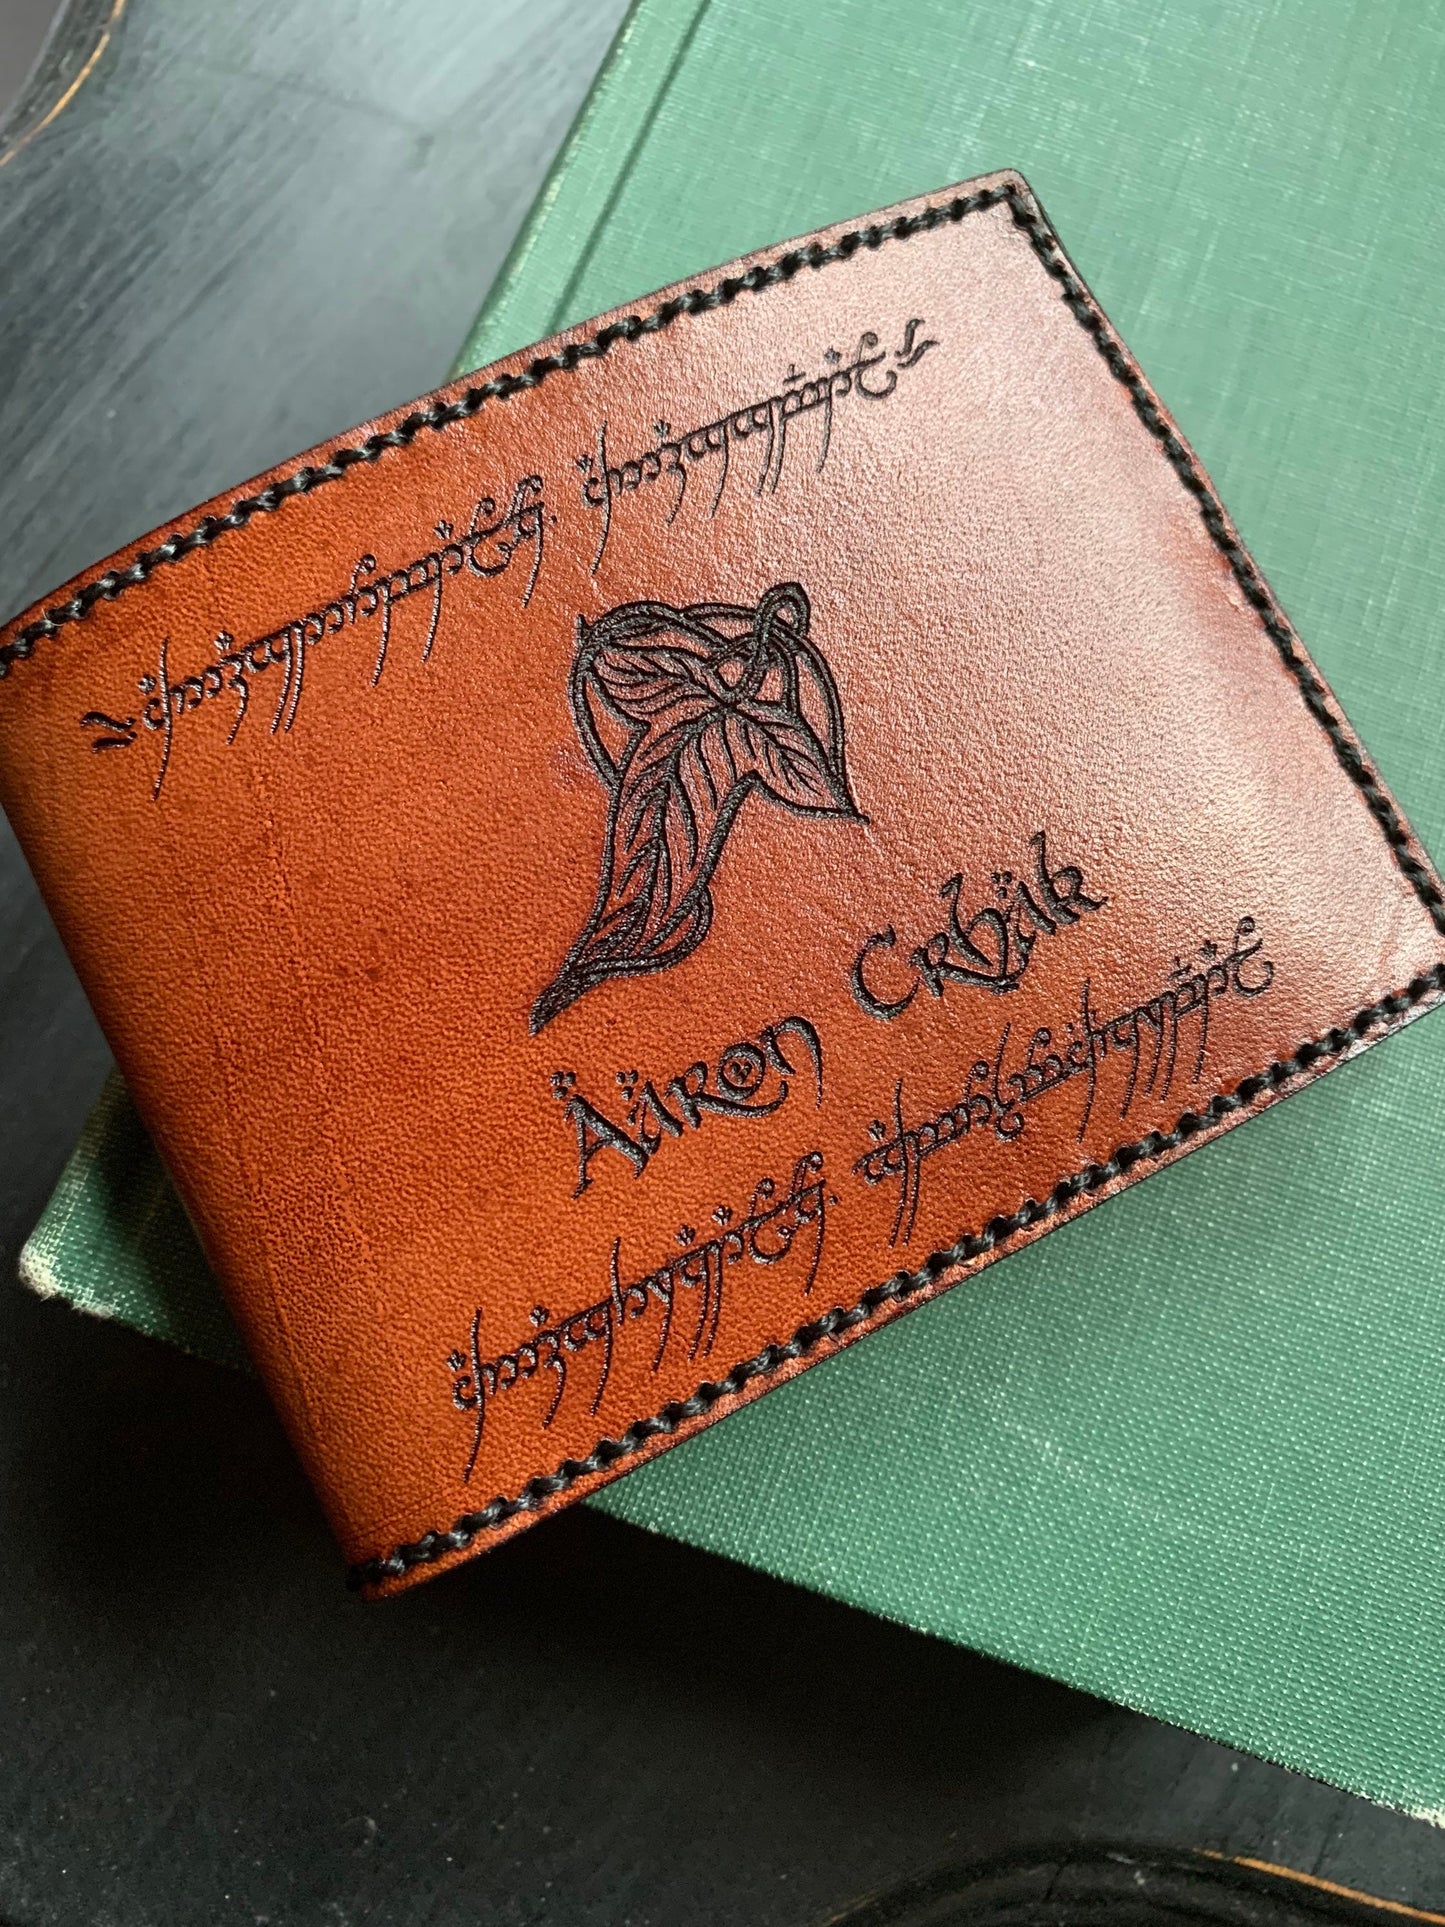 Custom Leather Wallet, Personalized Gift for Him/Men/Husband/Boyfriend/Dad/Anniversary/Fathers Day/Graduation/Birthday/Son